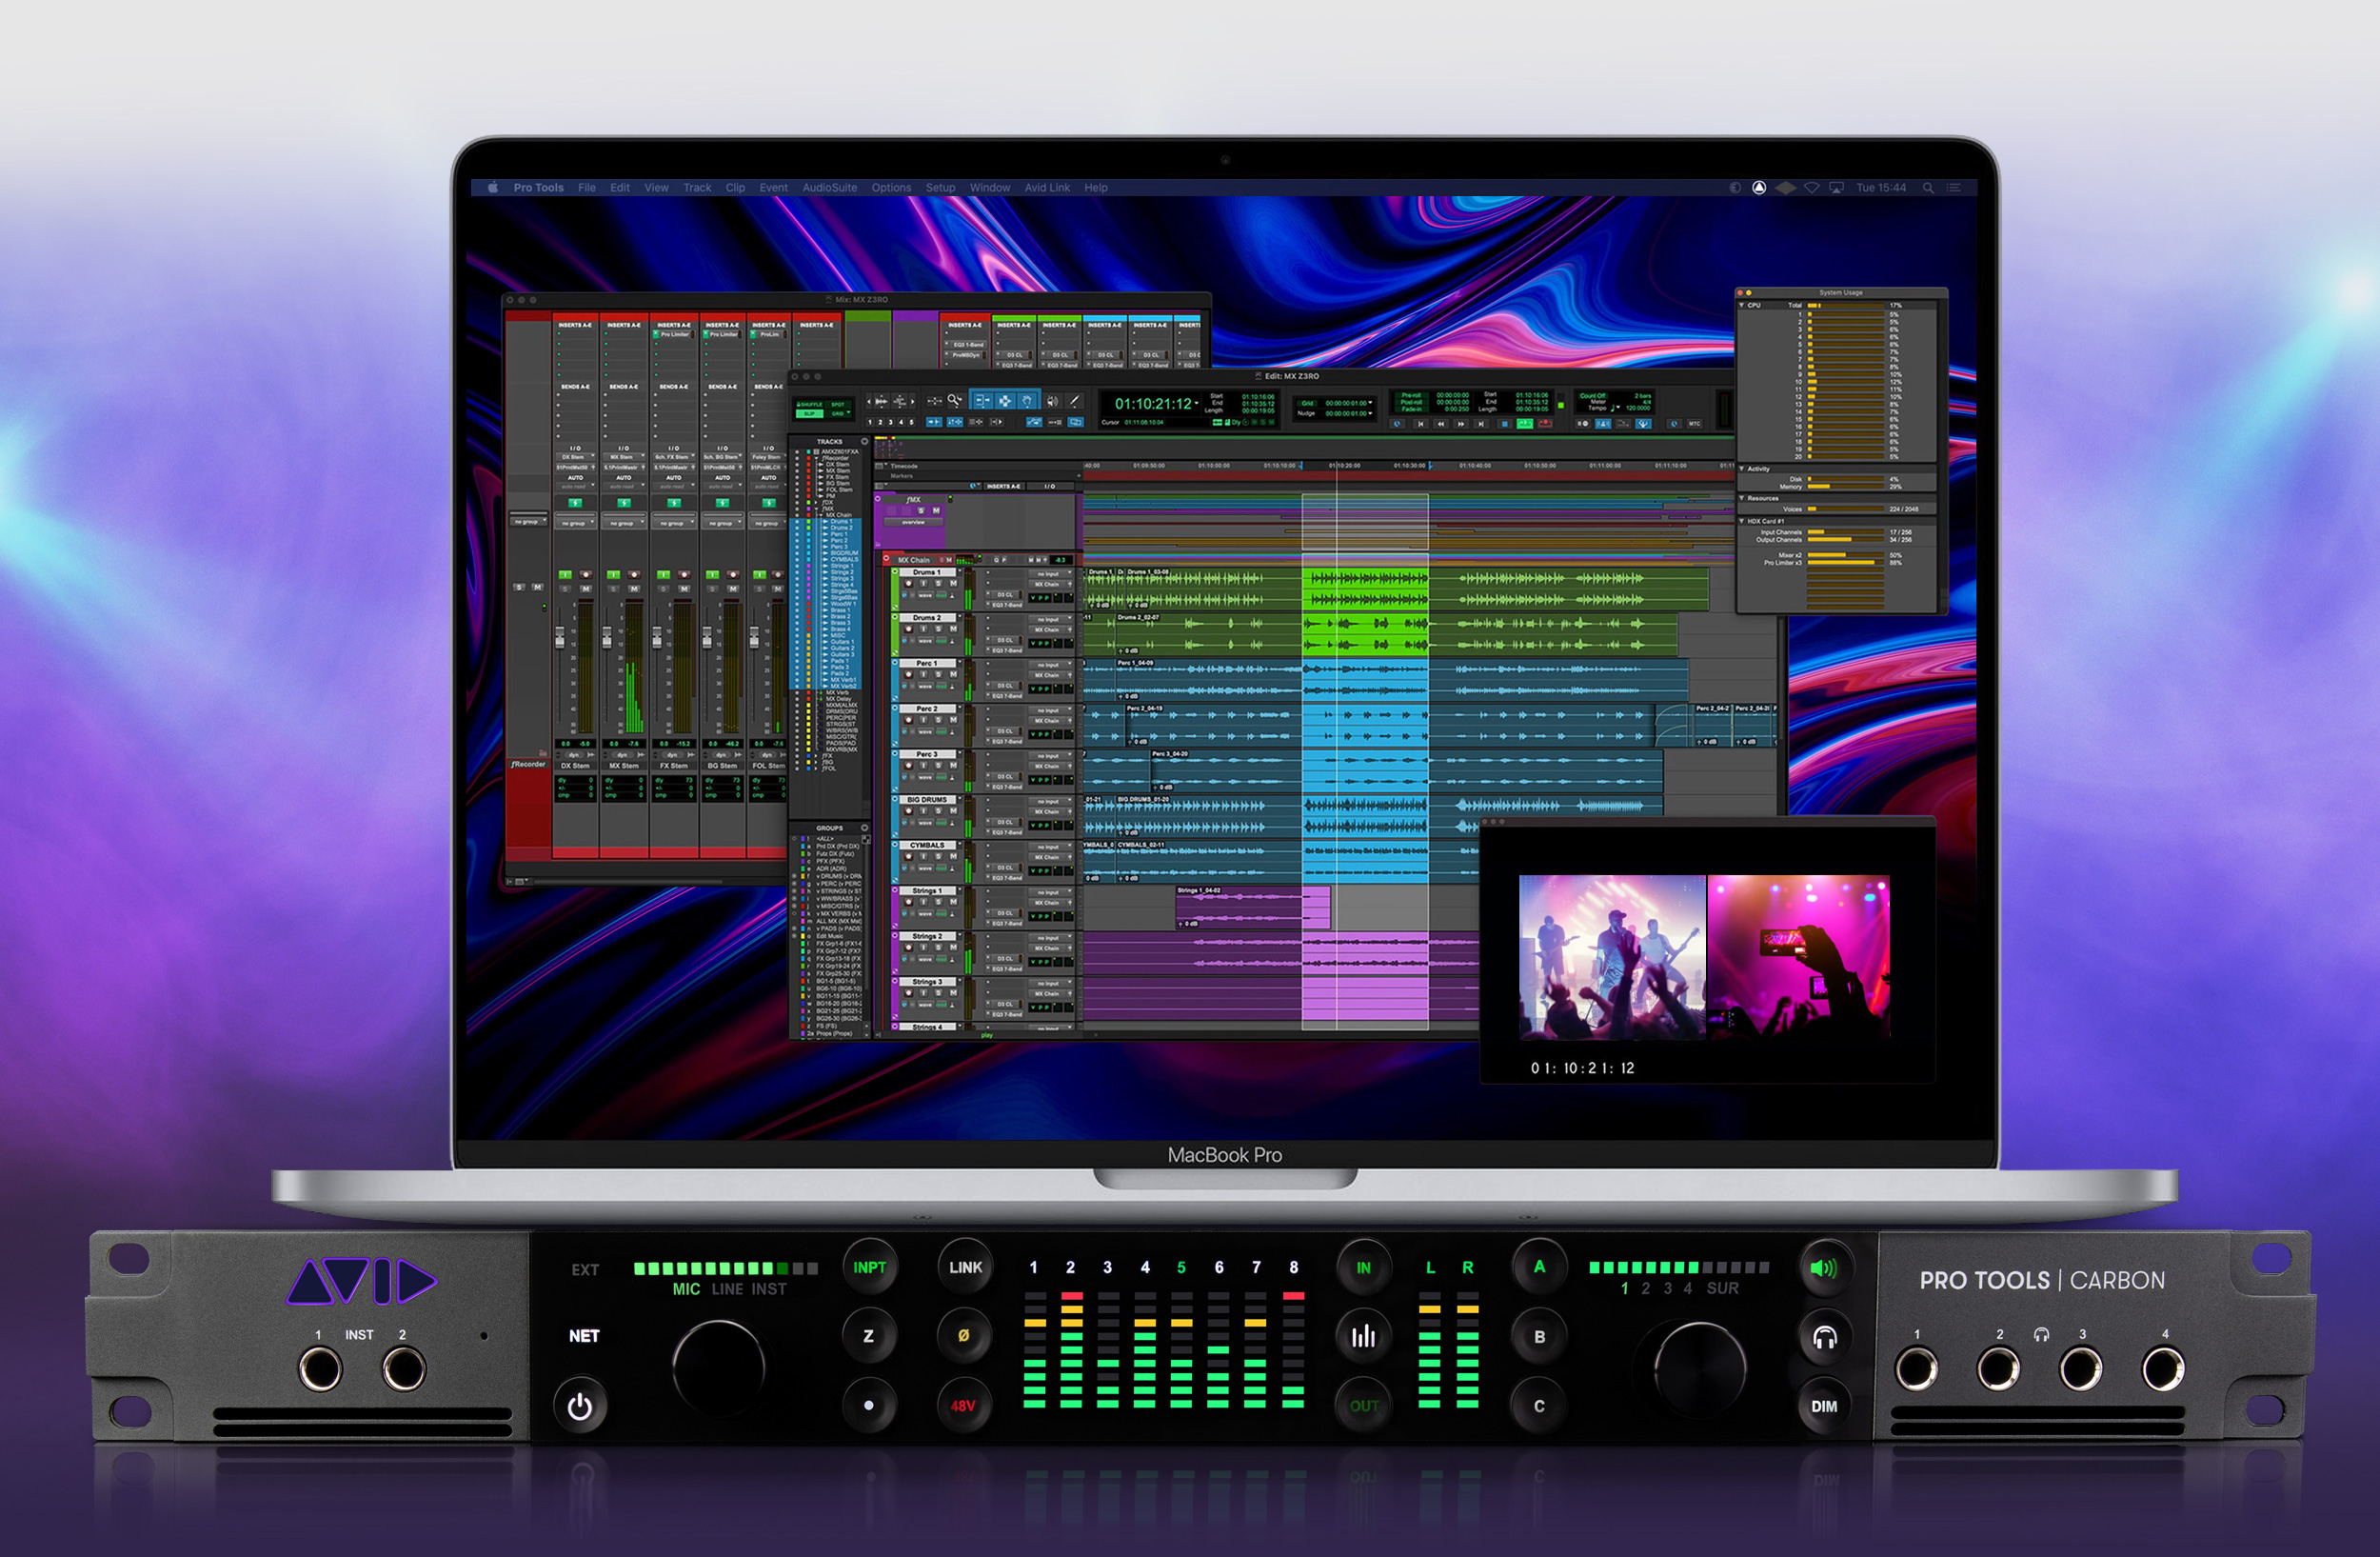 MacBook Pro with Pro Tools | Carbon